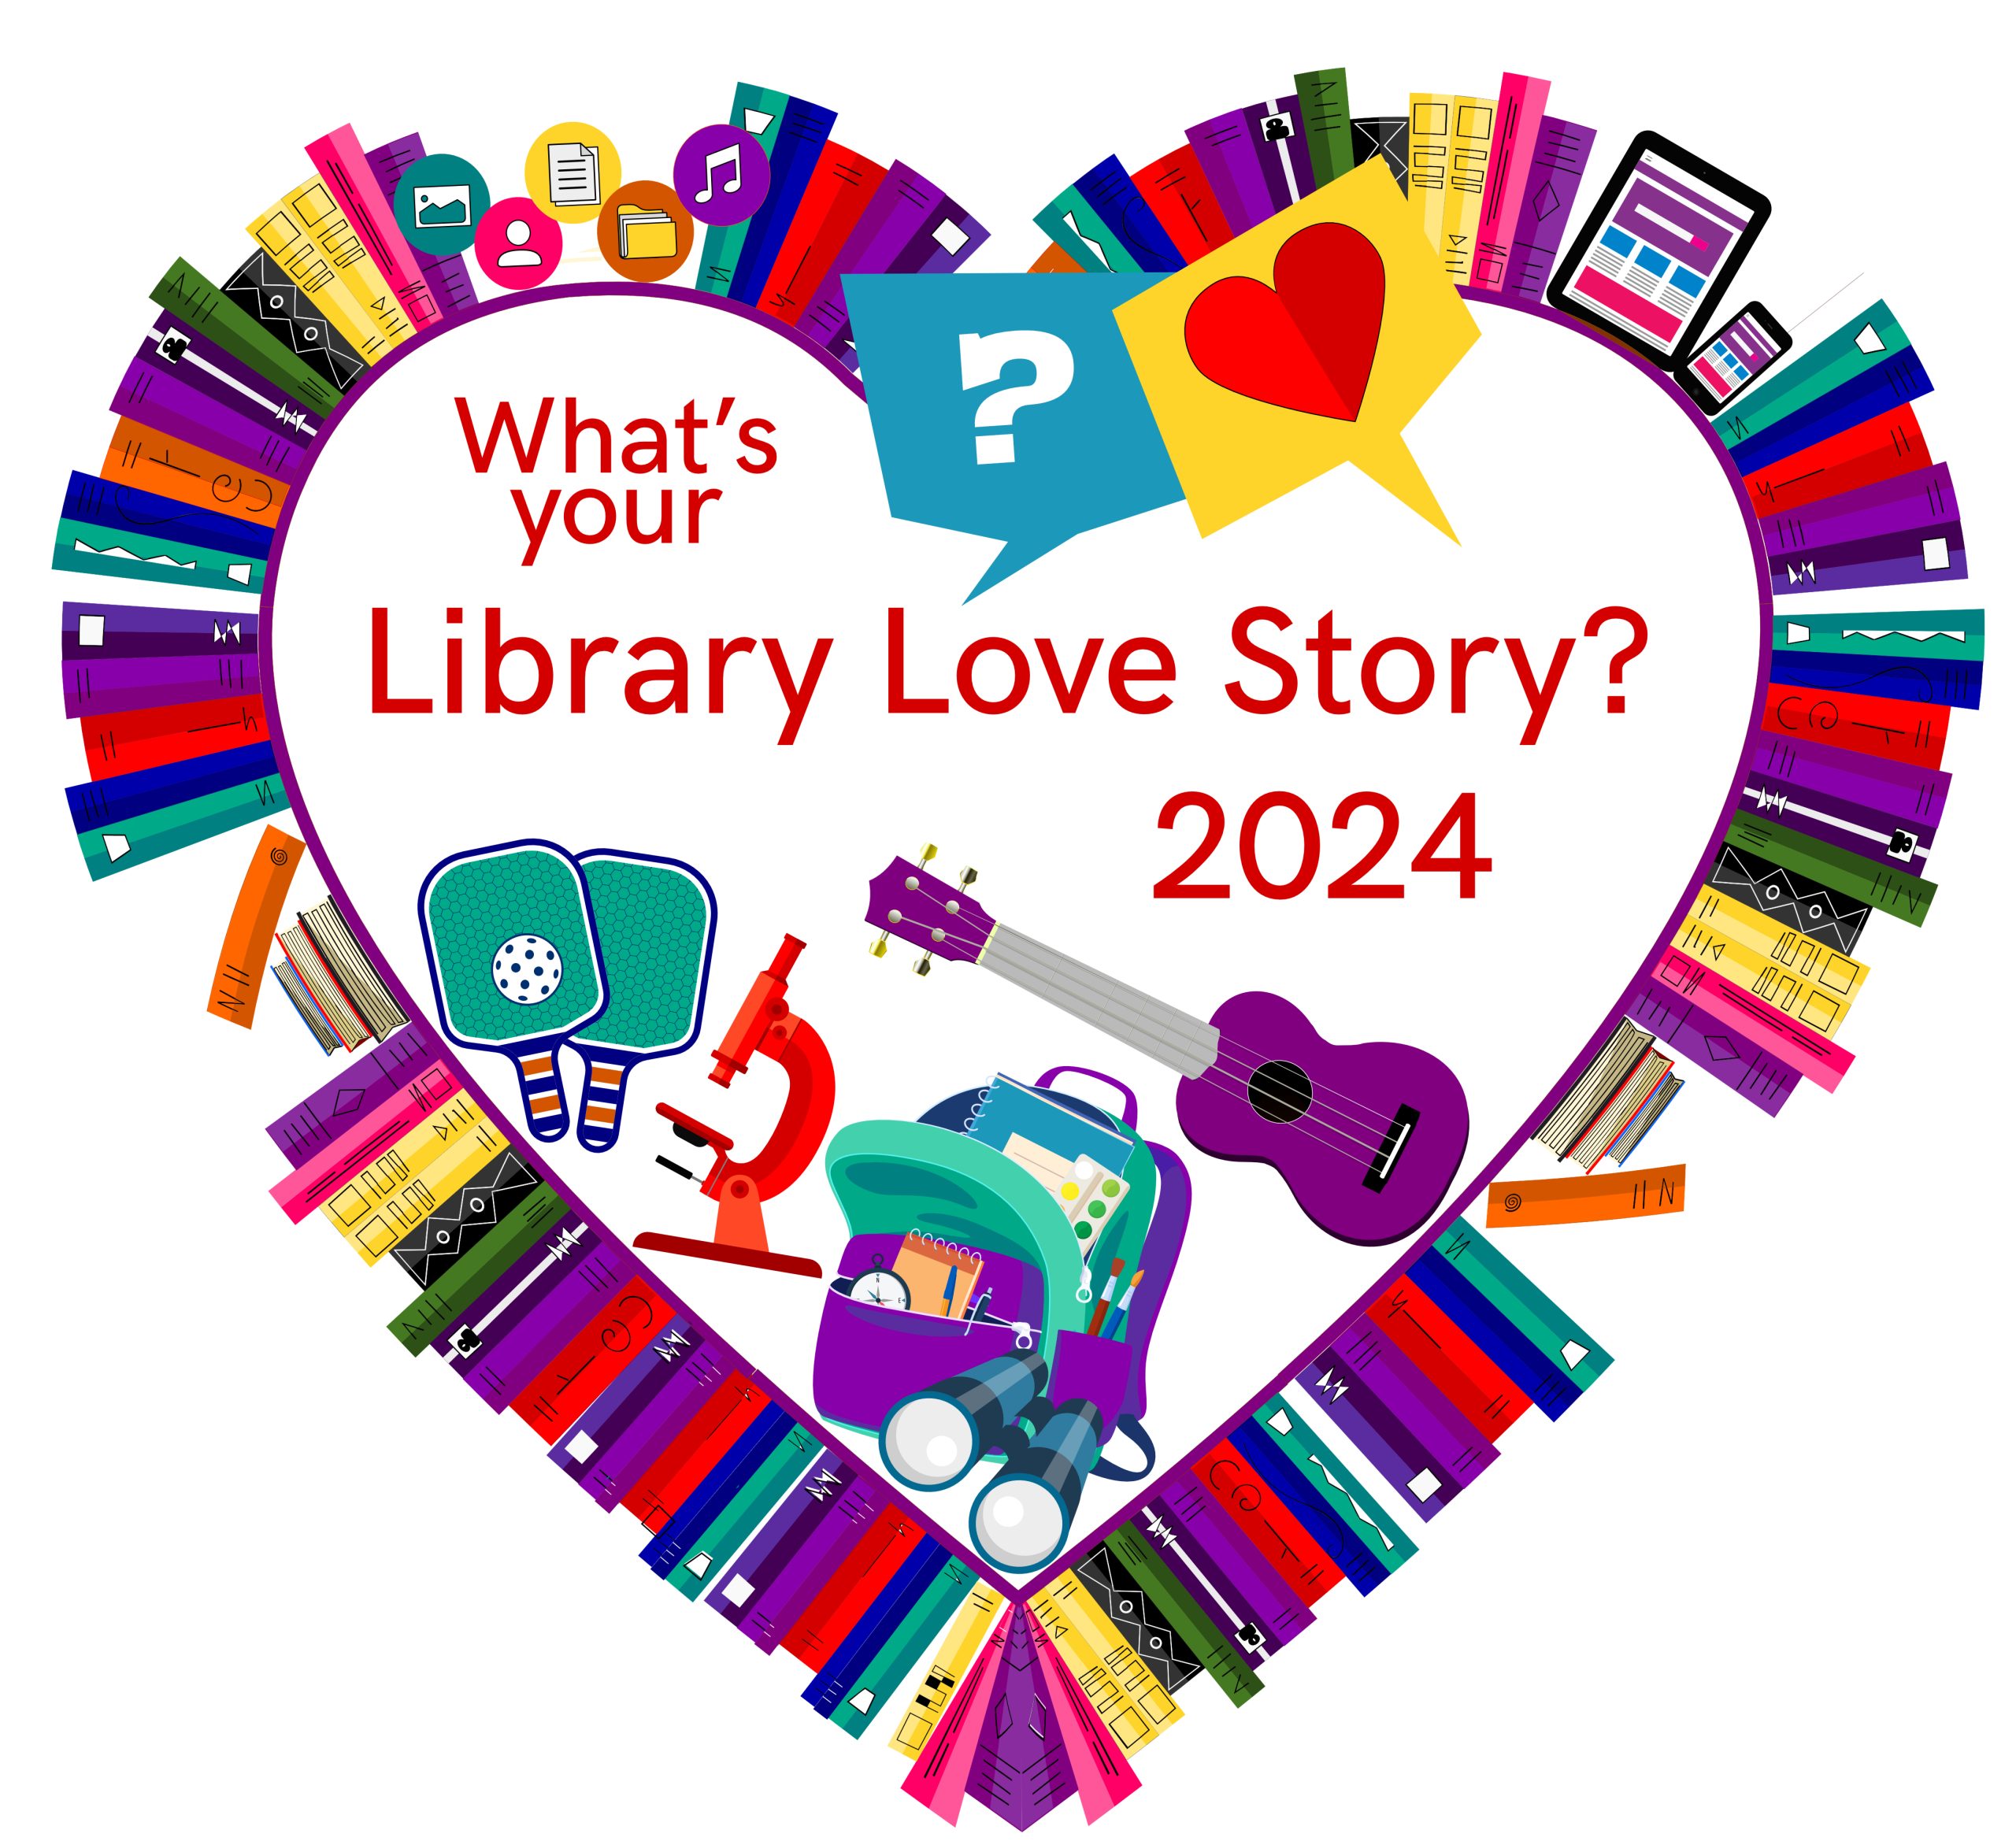 What’s your Library Love Story 2024 graphic with heart, books, library of things